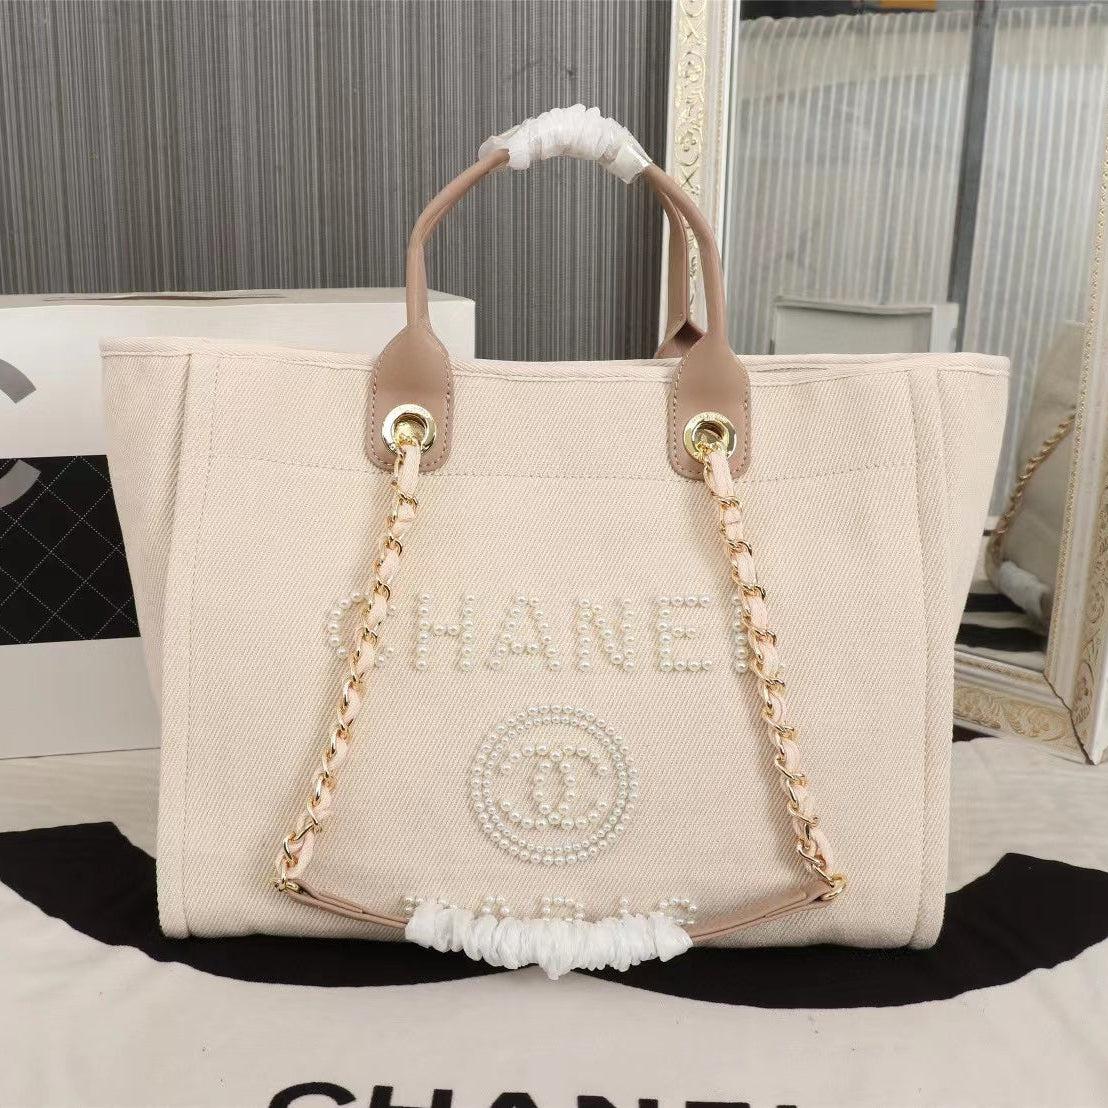 chanel inspired tote bag